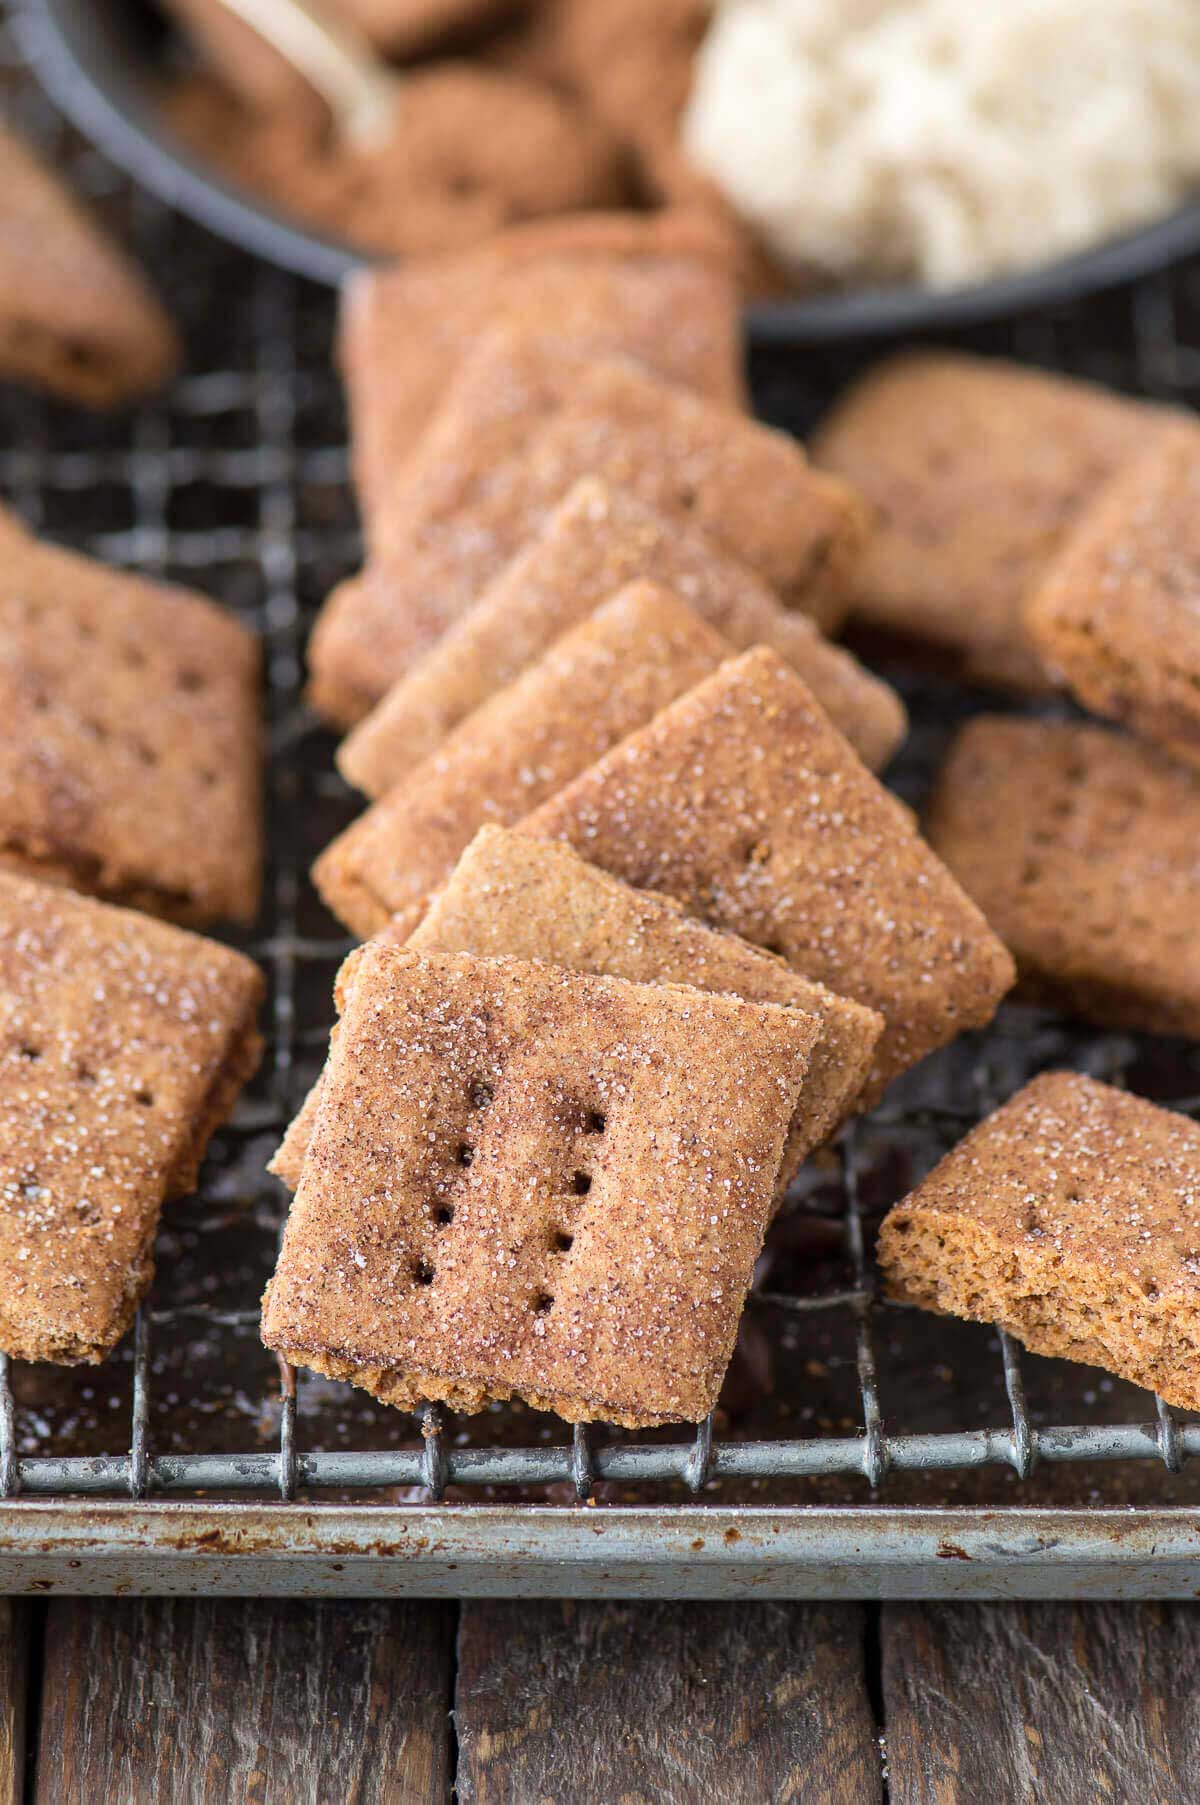 50 Awesome Gluten-Free Cracker Recipes for Any Occasion